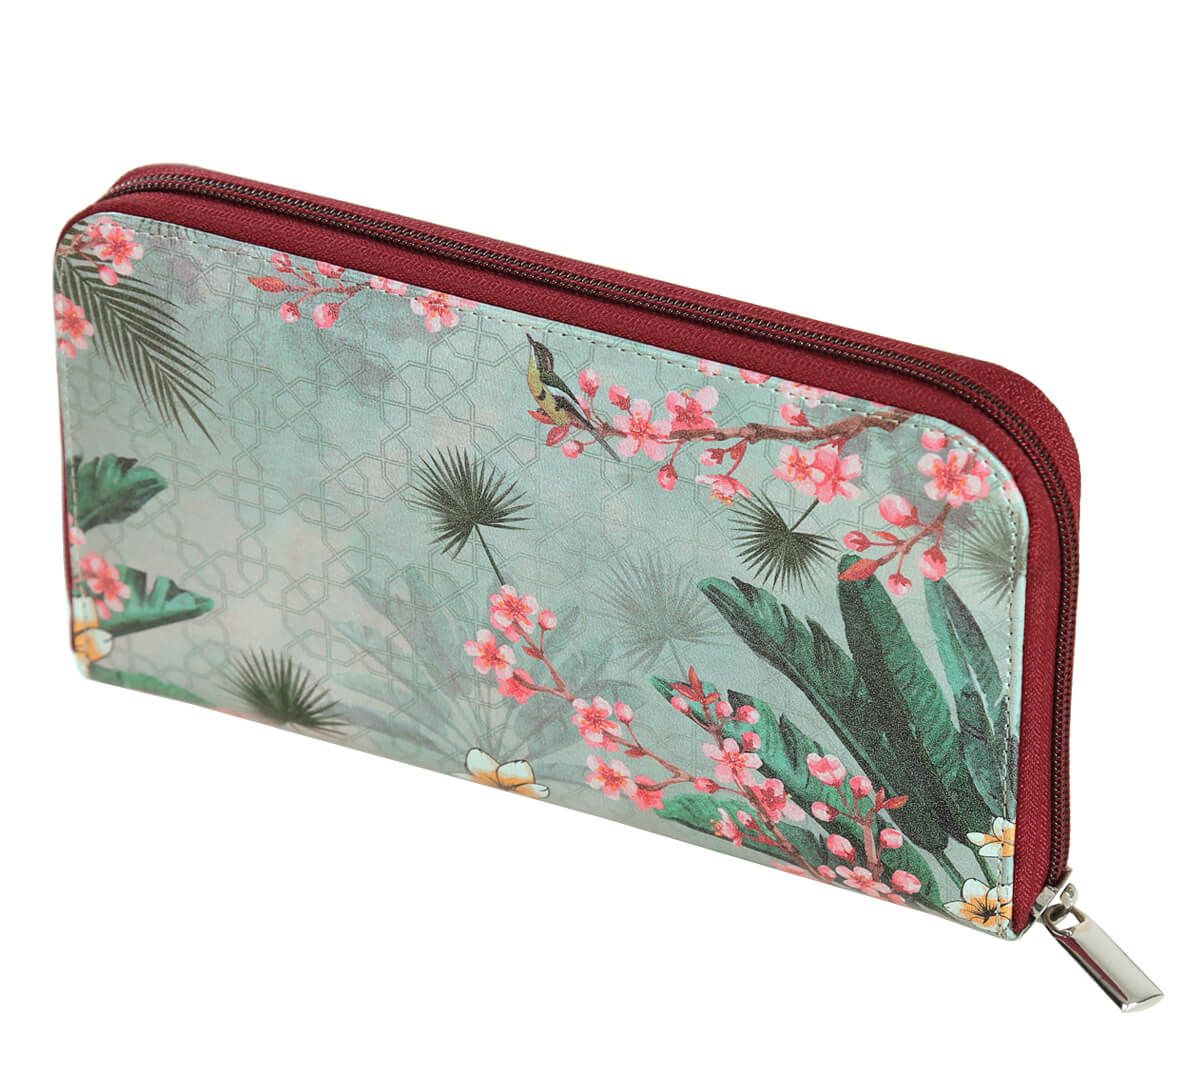 Cath Kidston Folded Zip Wallet with leather Trailing Rose - Slate Blue  515375 : Amazon.in: Bags, Wallets and Luggage